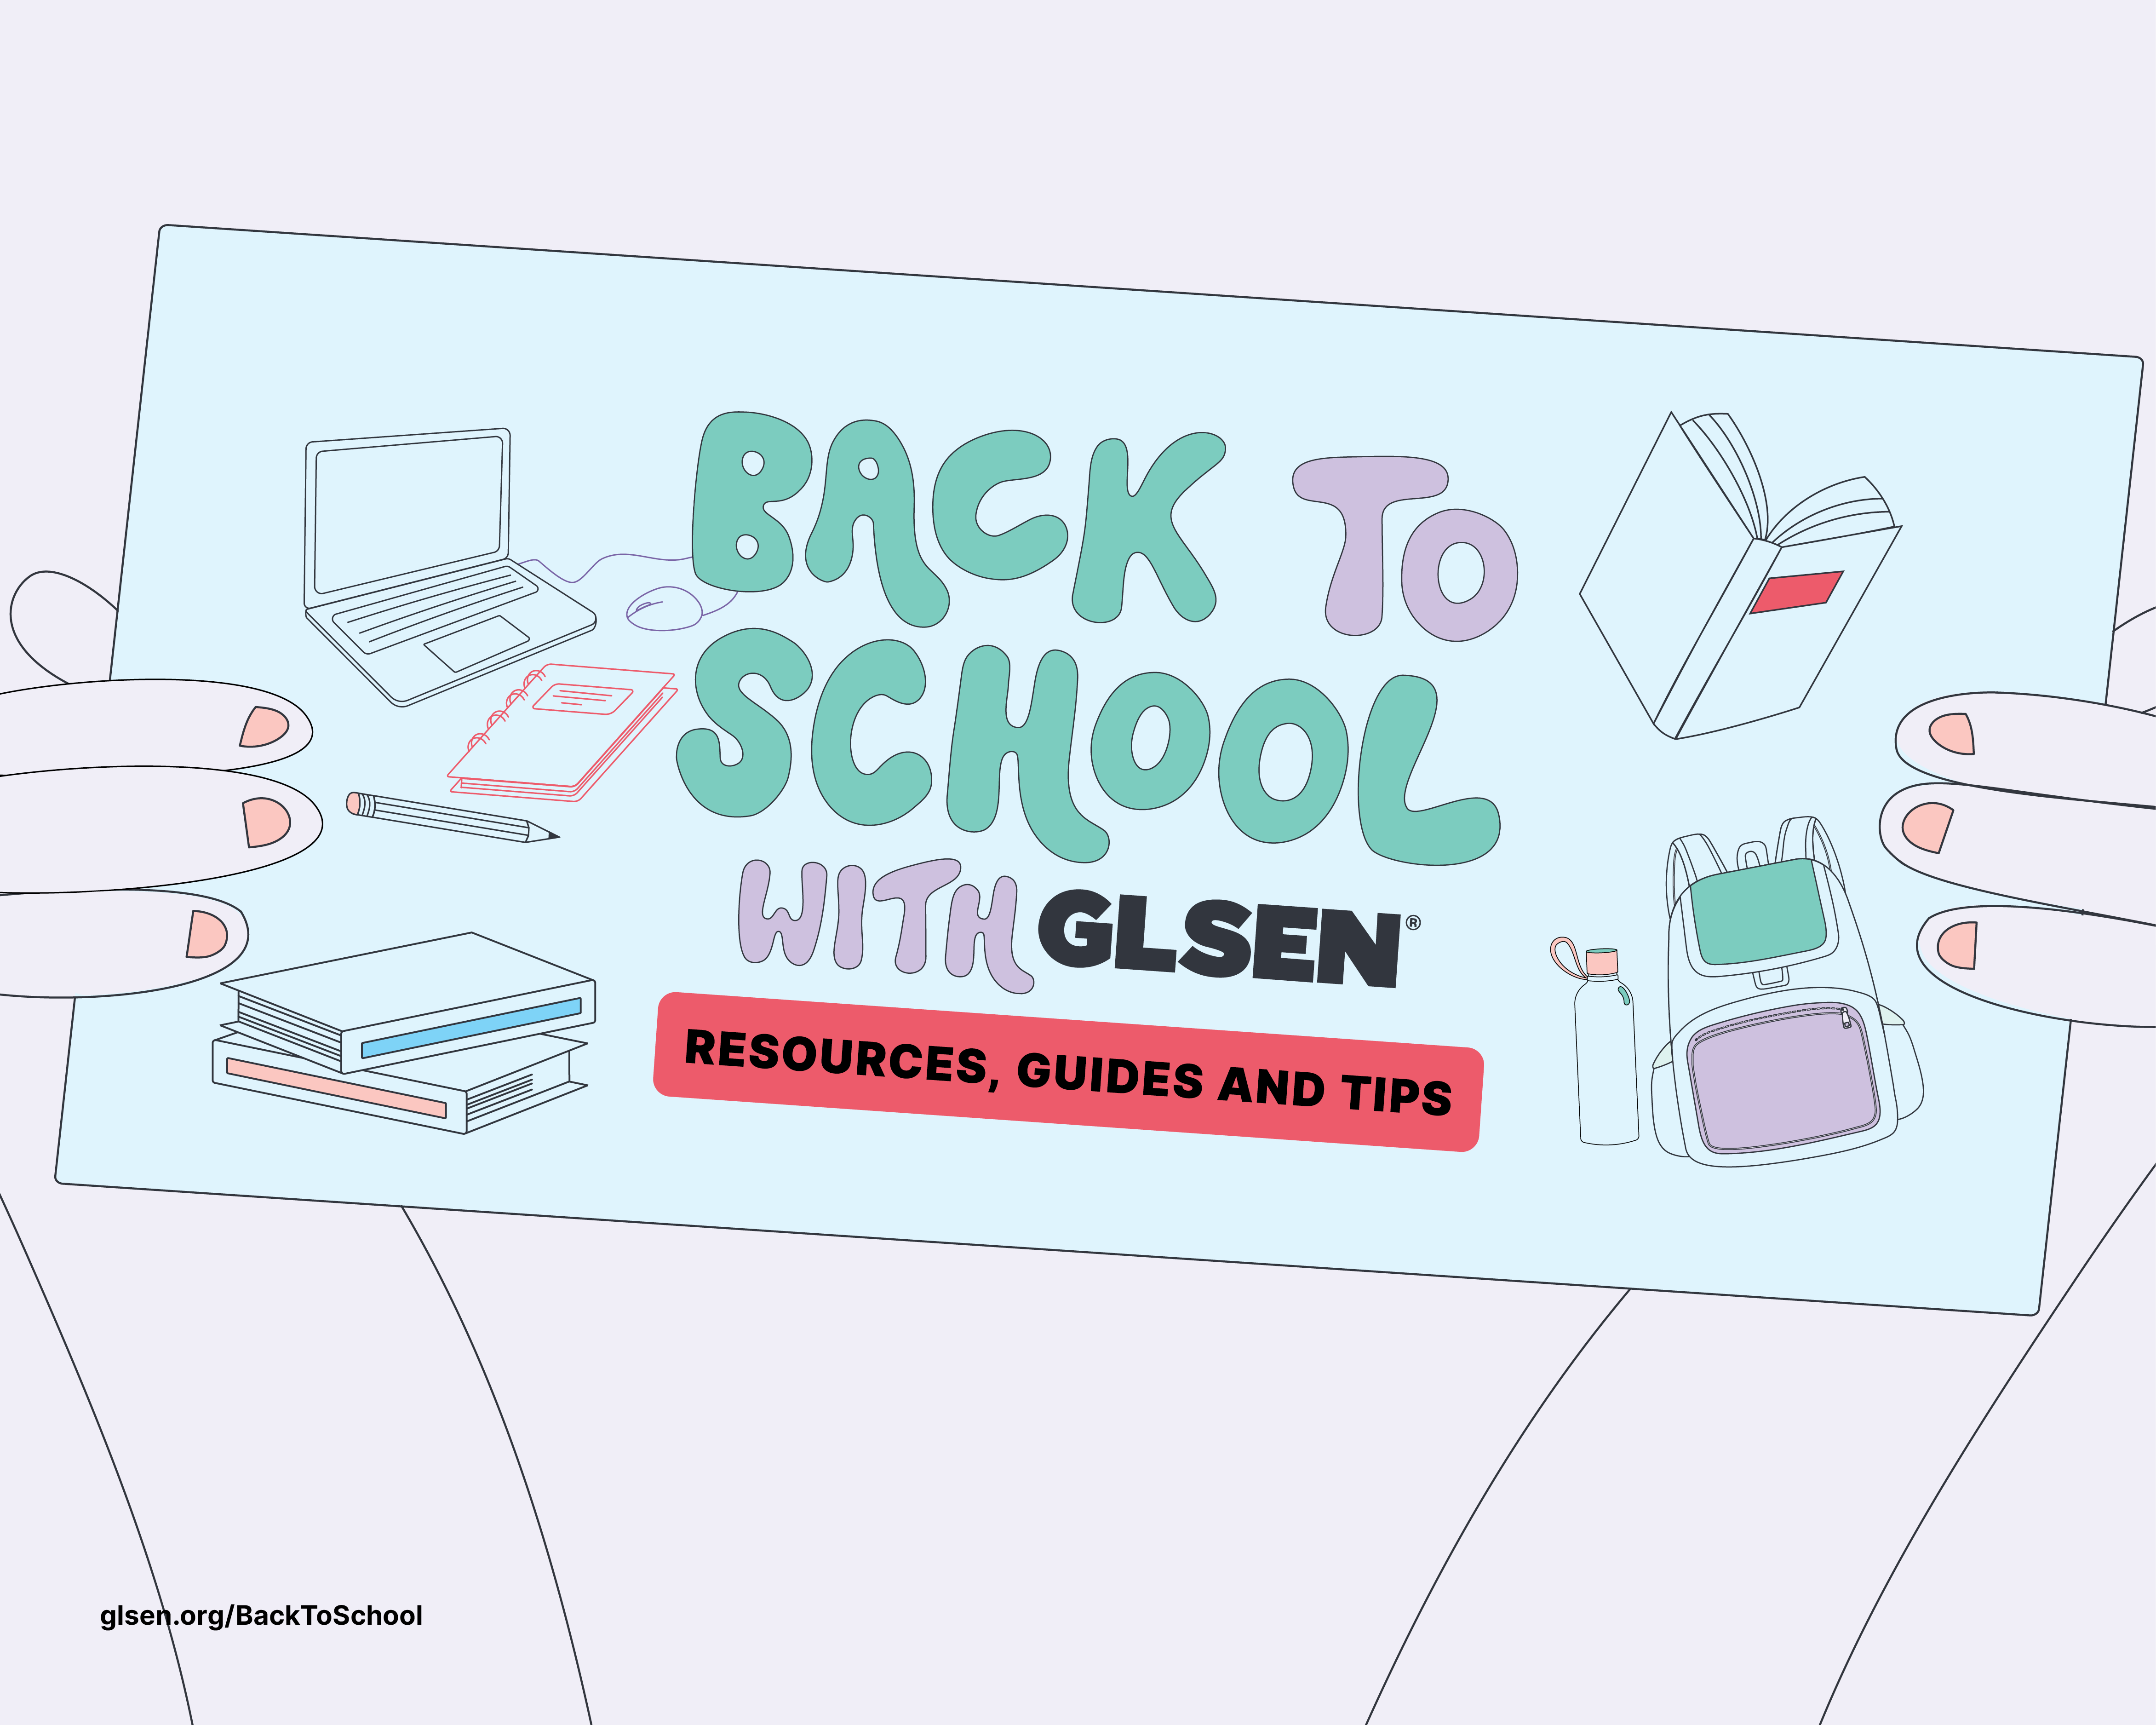 Back to School with GLSEN